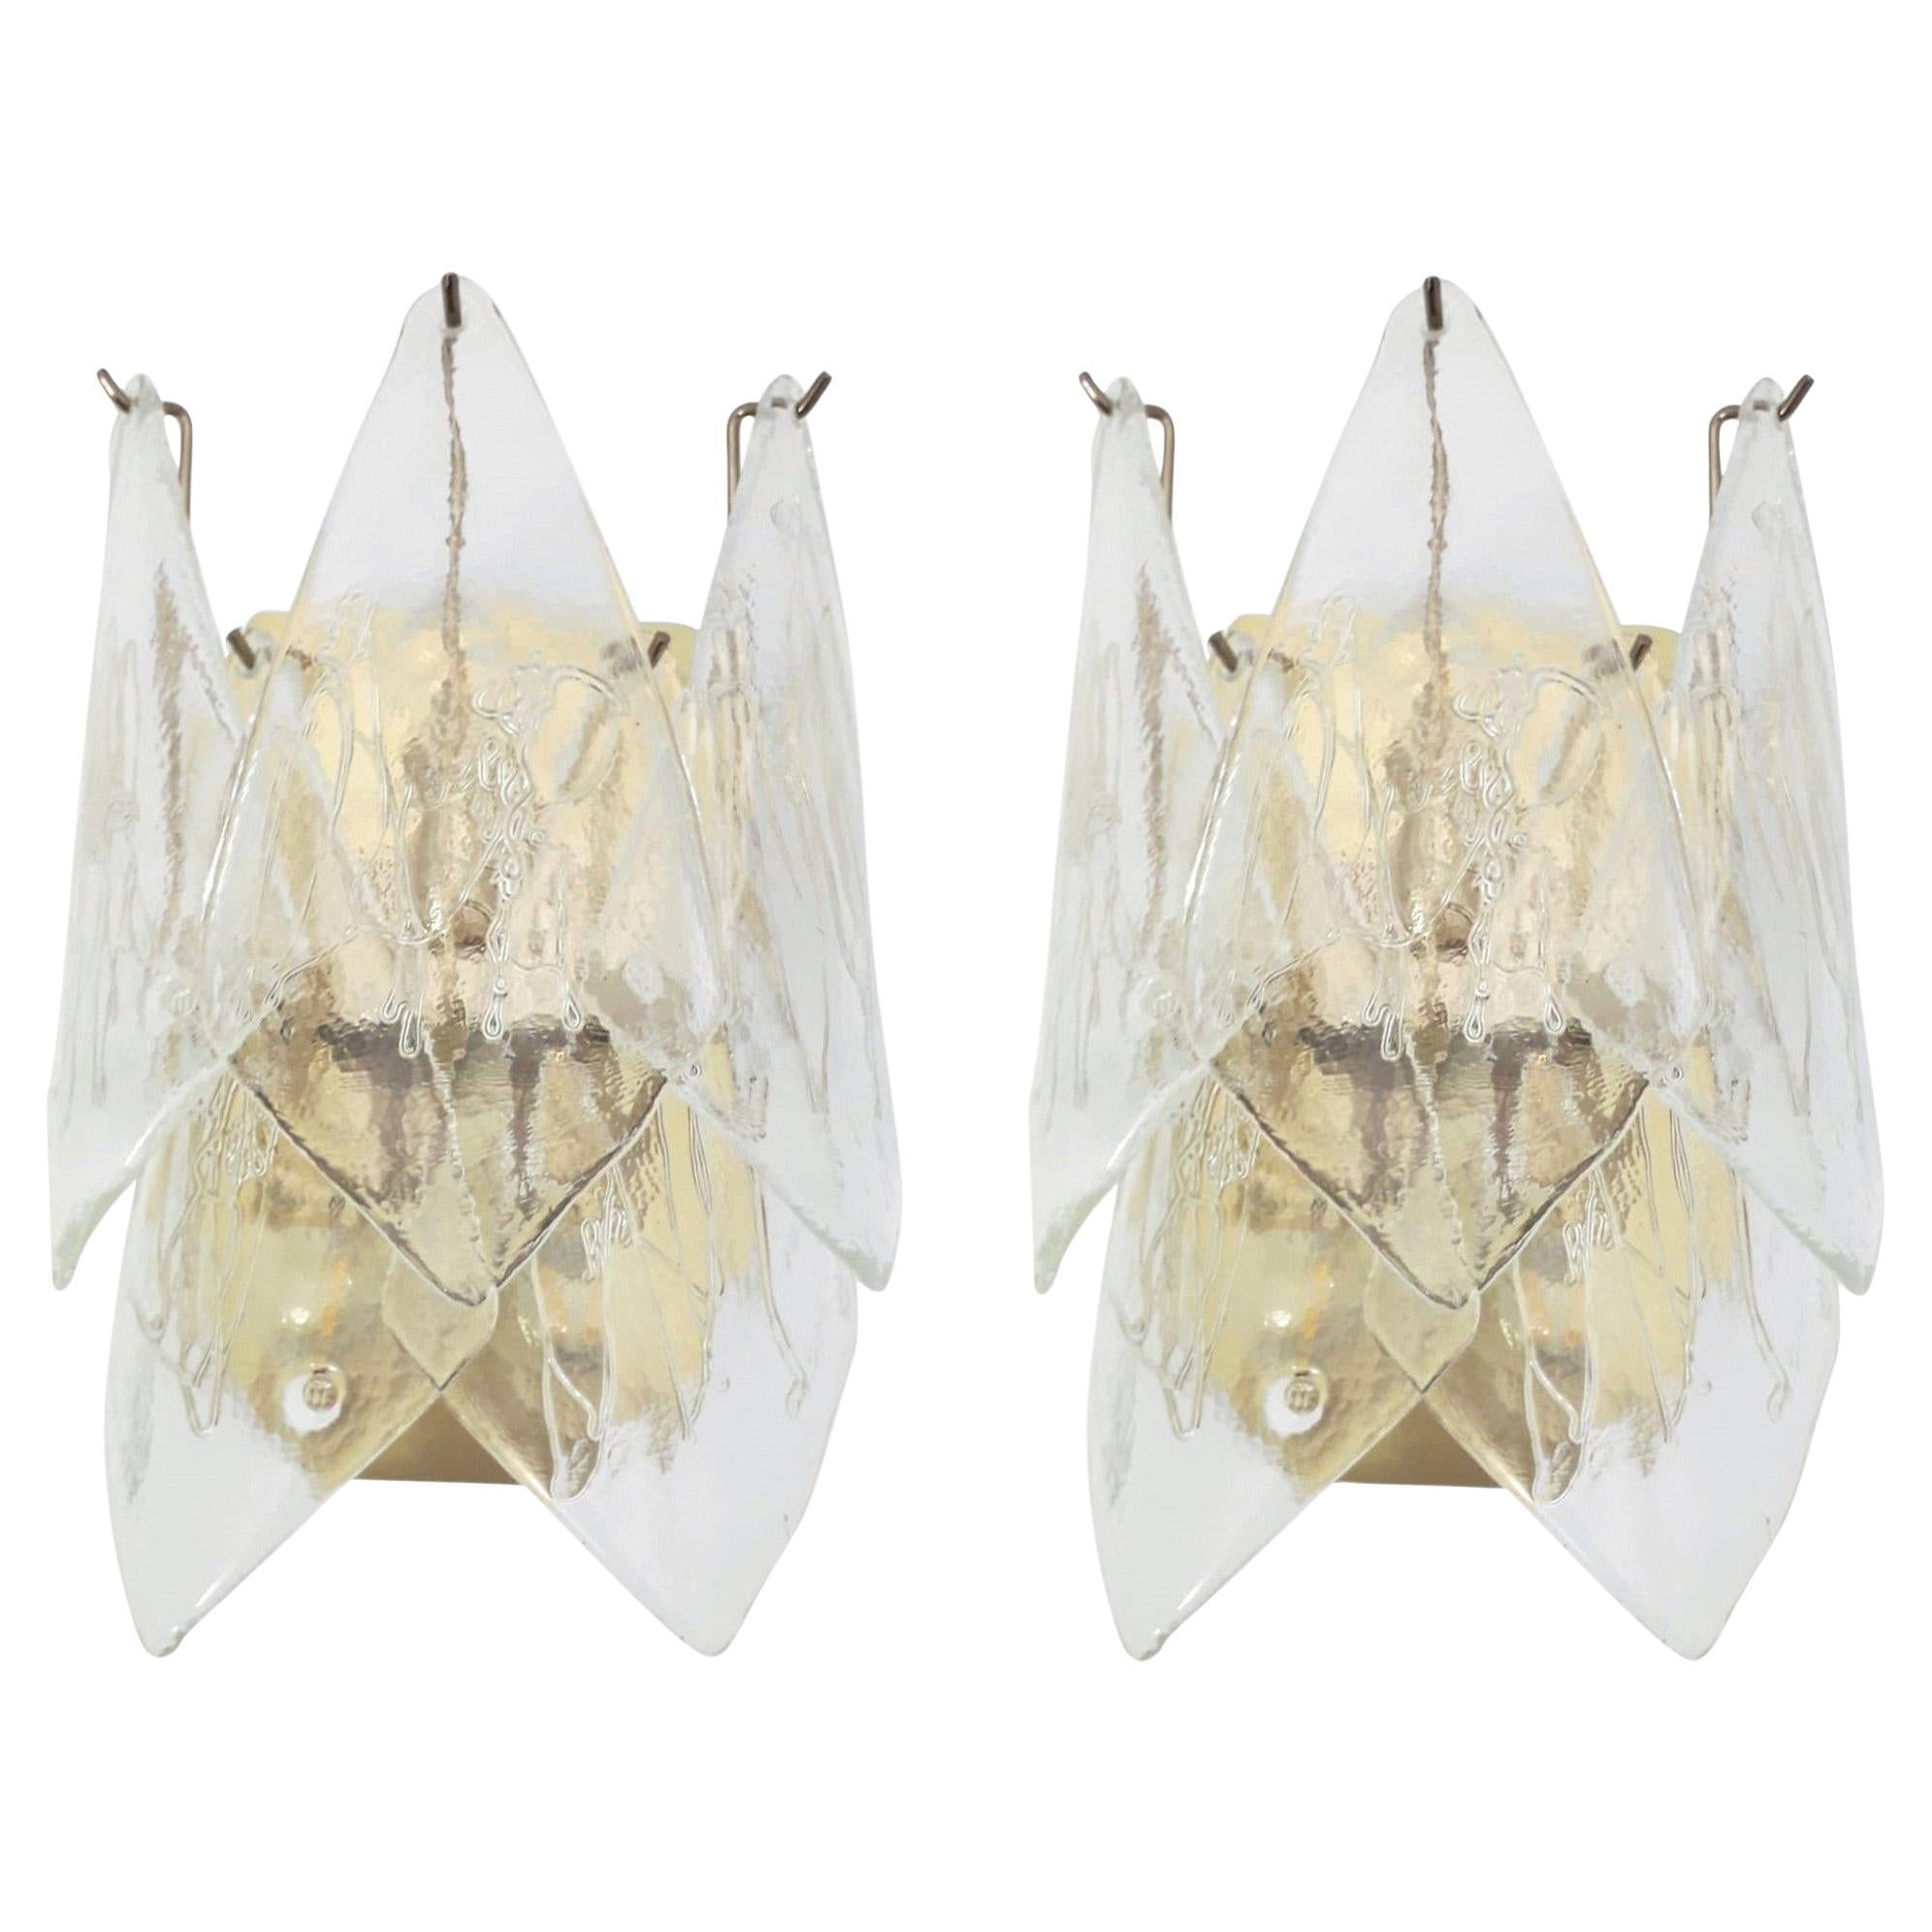 Pair of "Vele" Sconces by La Murrina, 2 Pairs Available For Sale